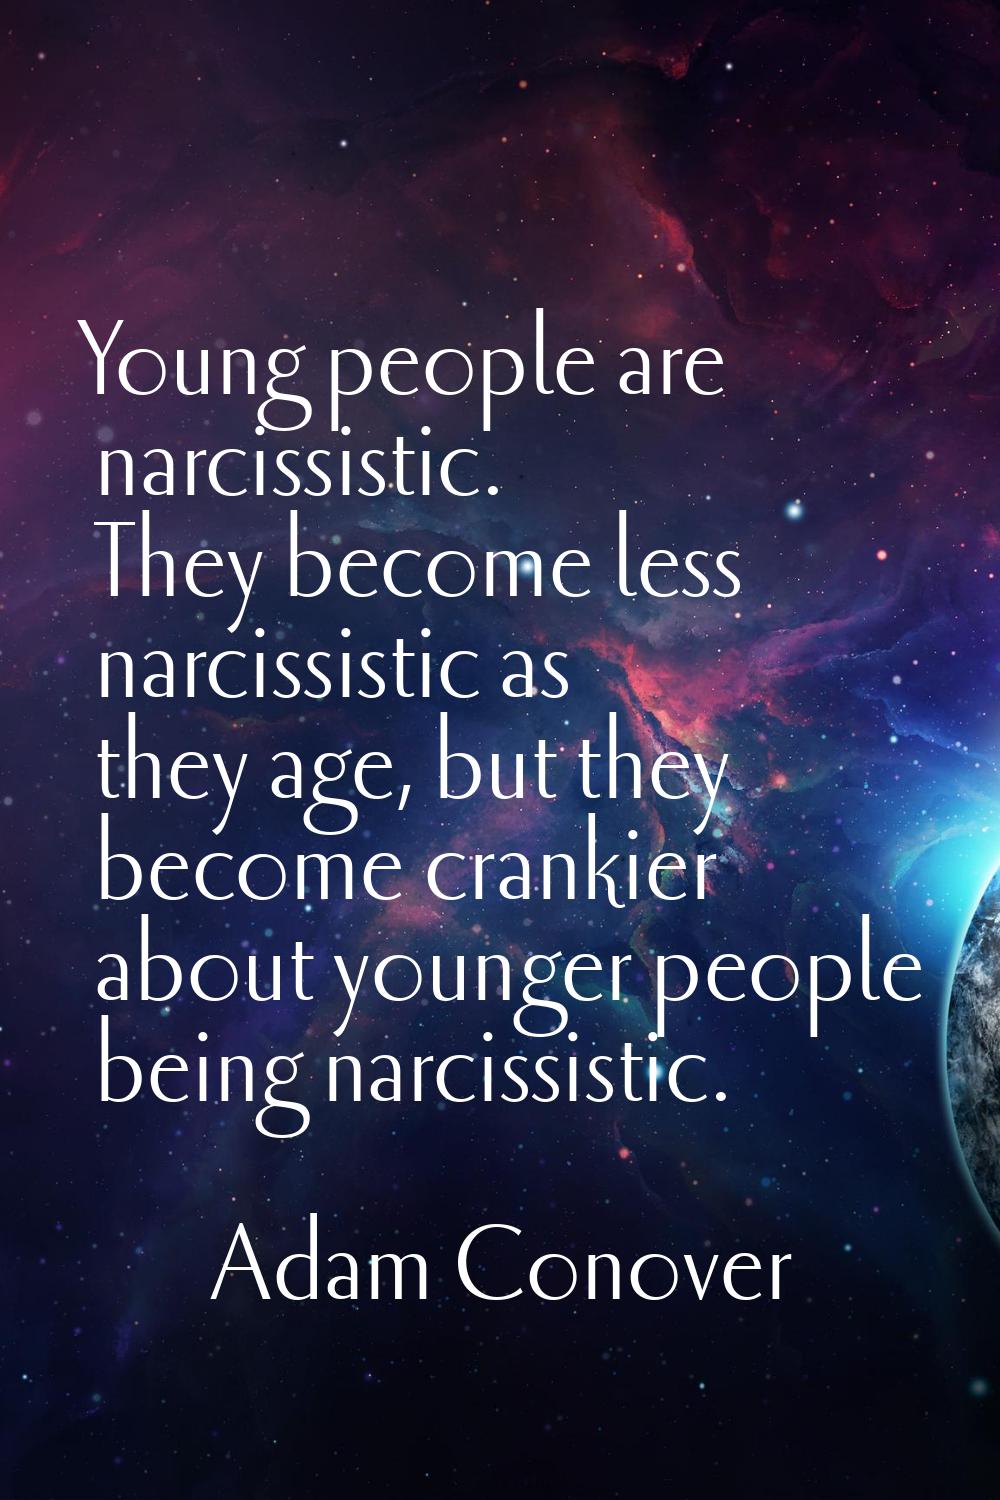 Young people are narcissistic. They become less narcissistic as they age, but they become crankier 